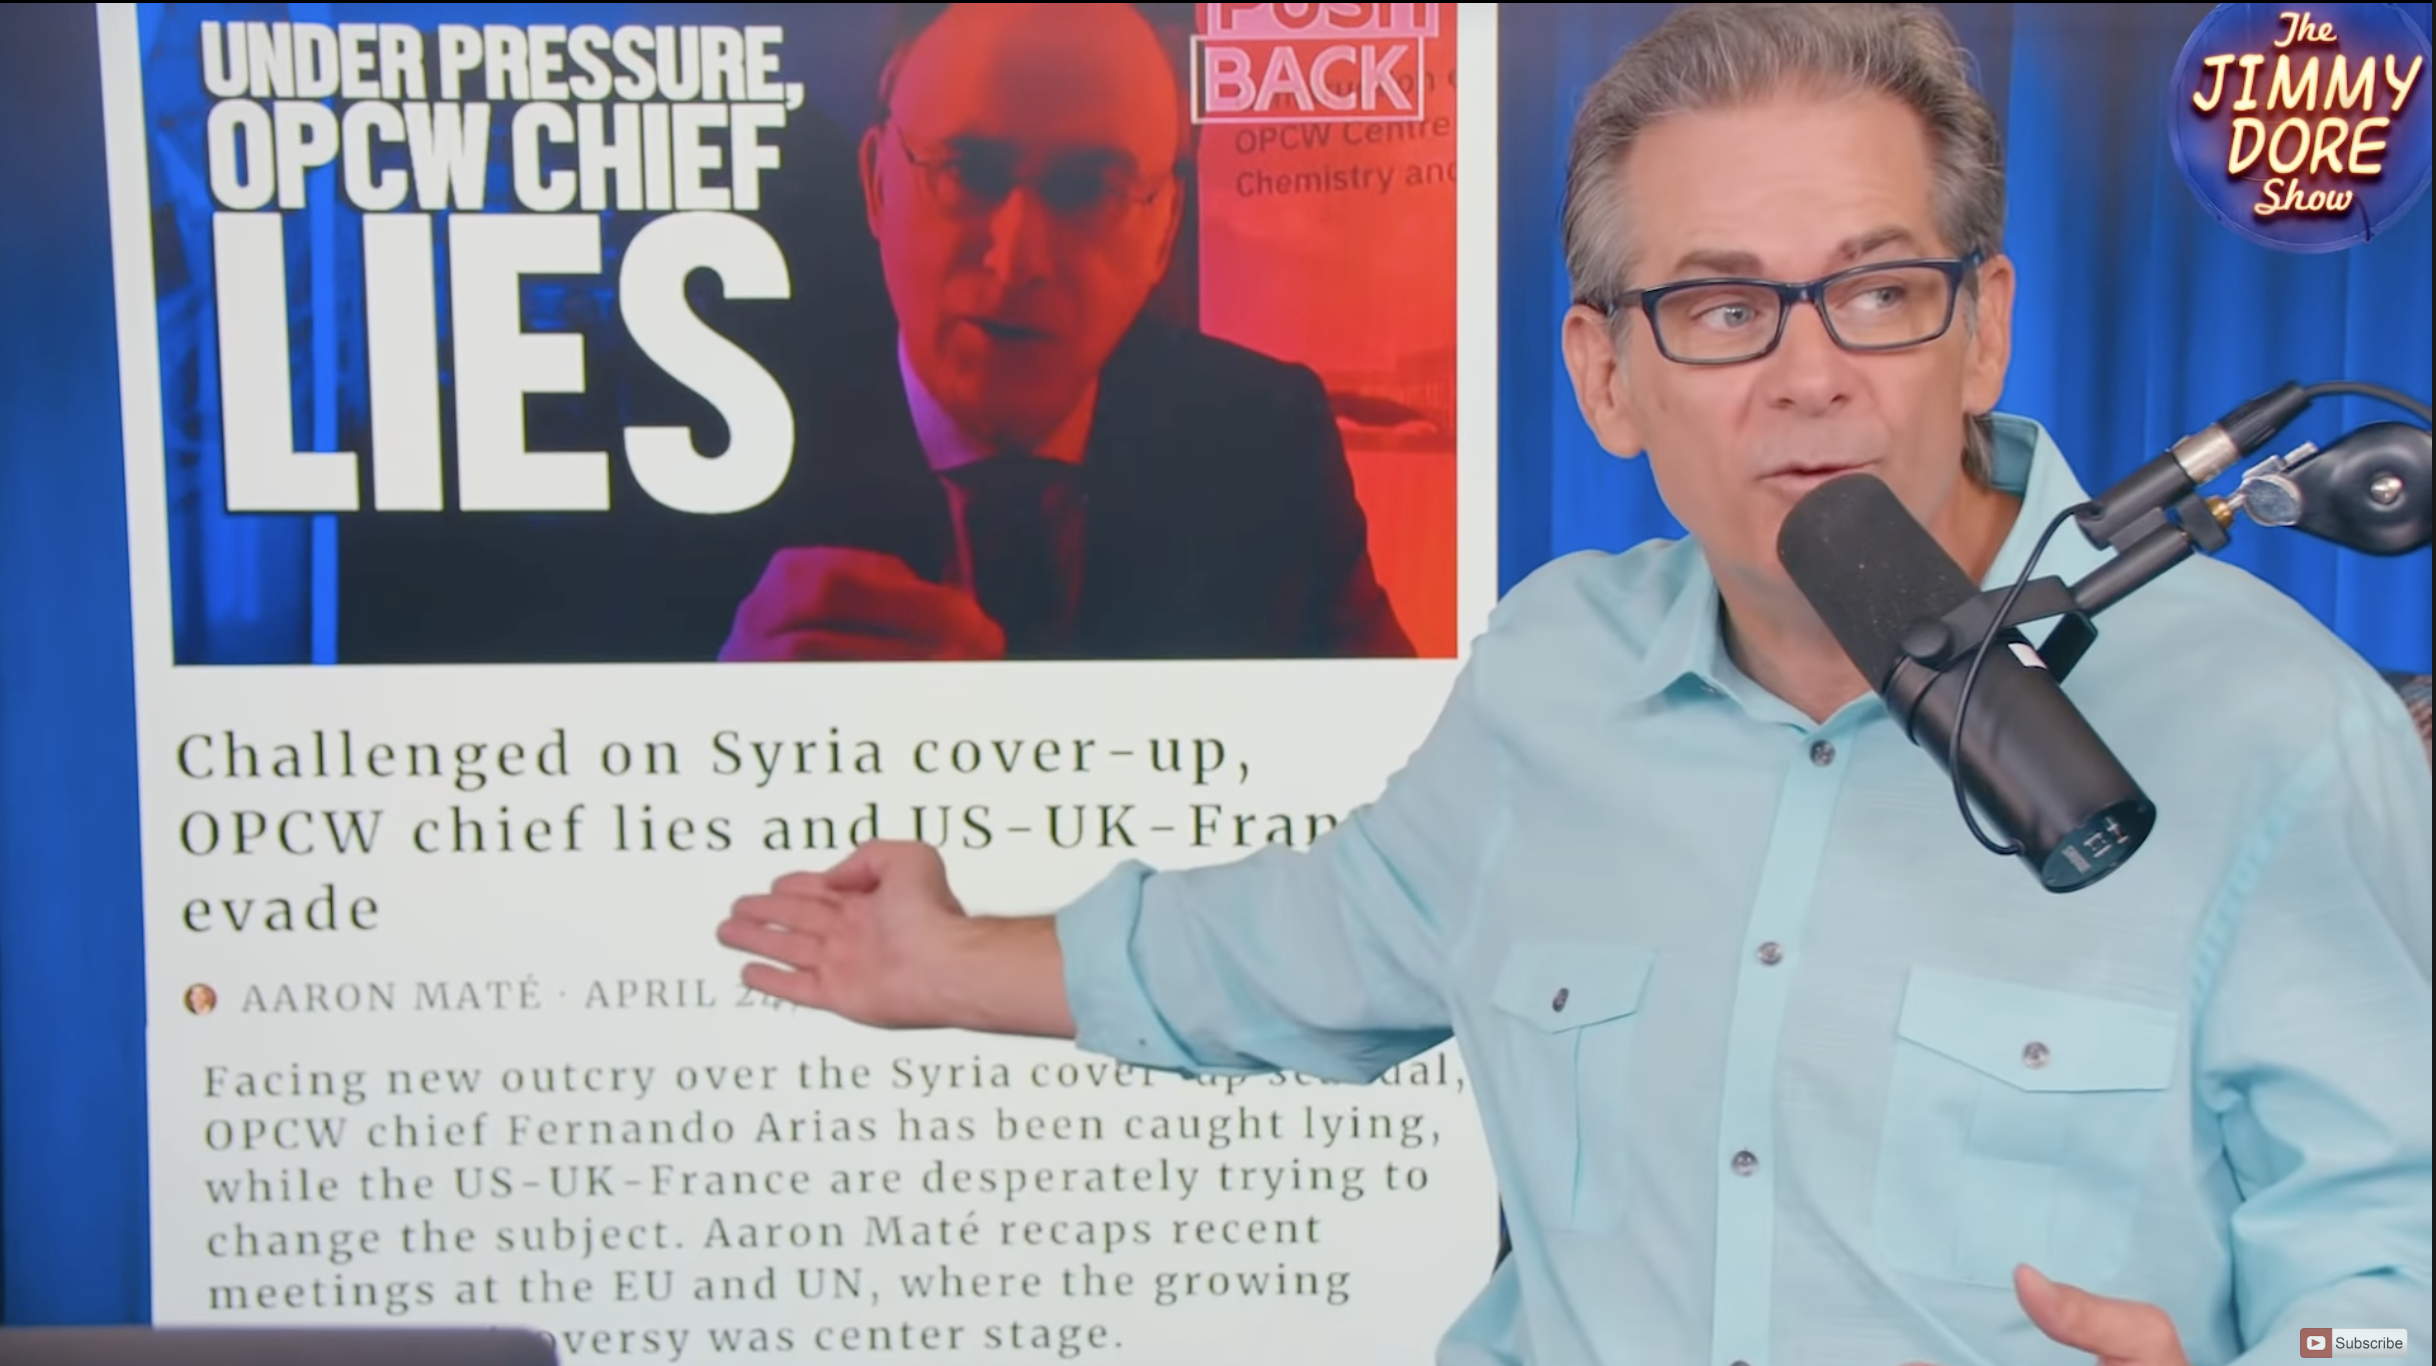 MUST VIDEOS: Aaron Maté & Jimmy Dore on Biggest Deception Since Iraq to Justify the War on Syria